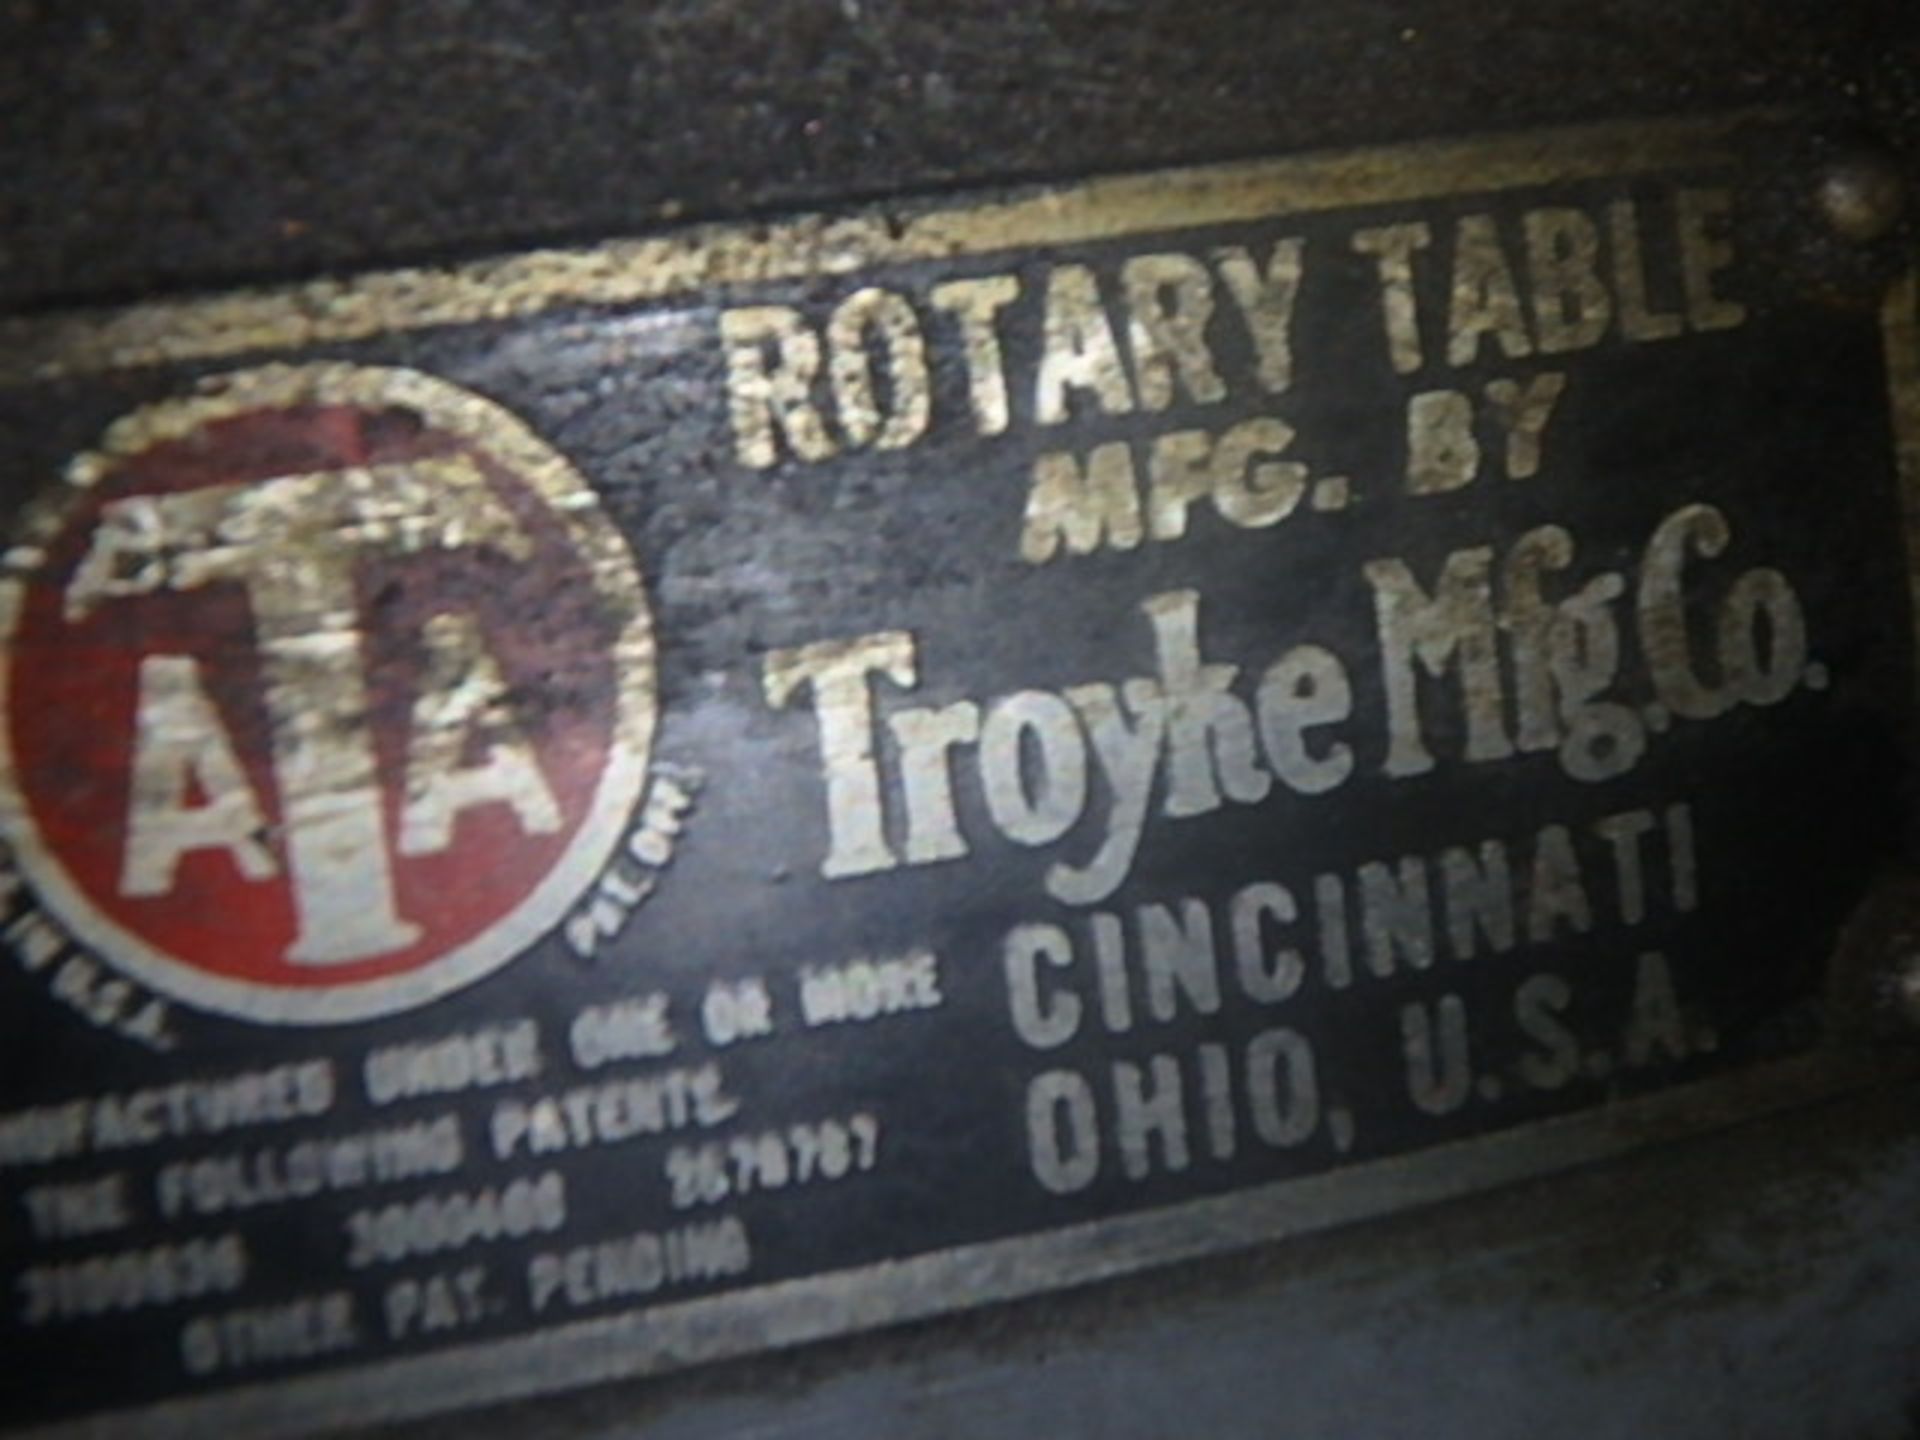 21" Troyke Rotary Table #T-21 - Image 4 of 5